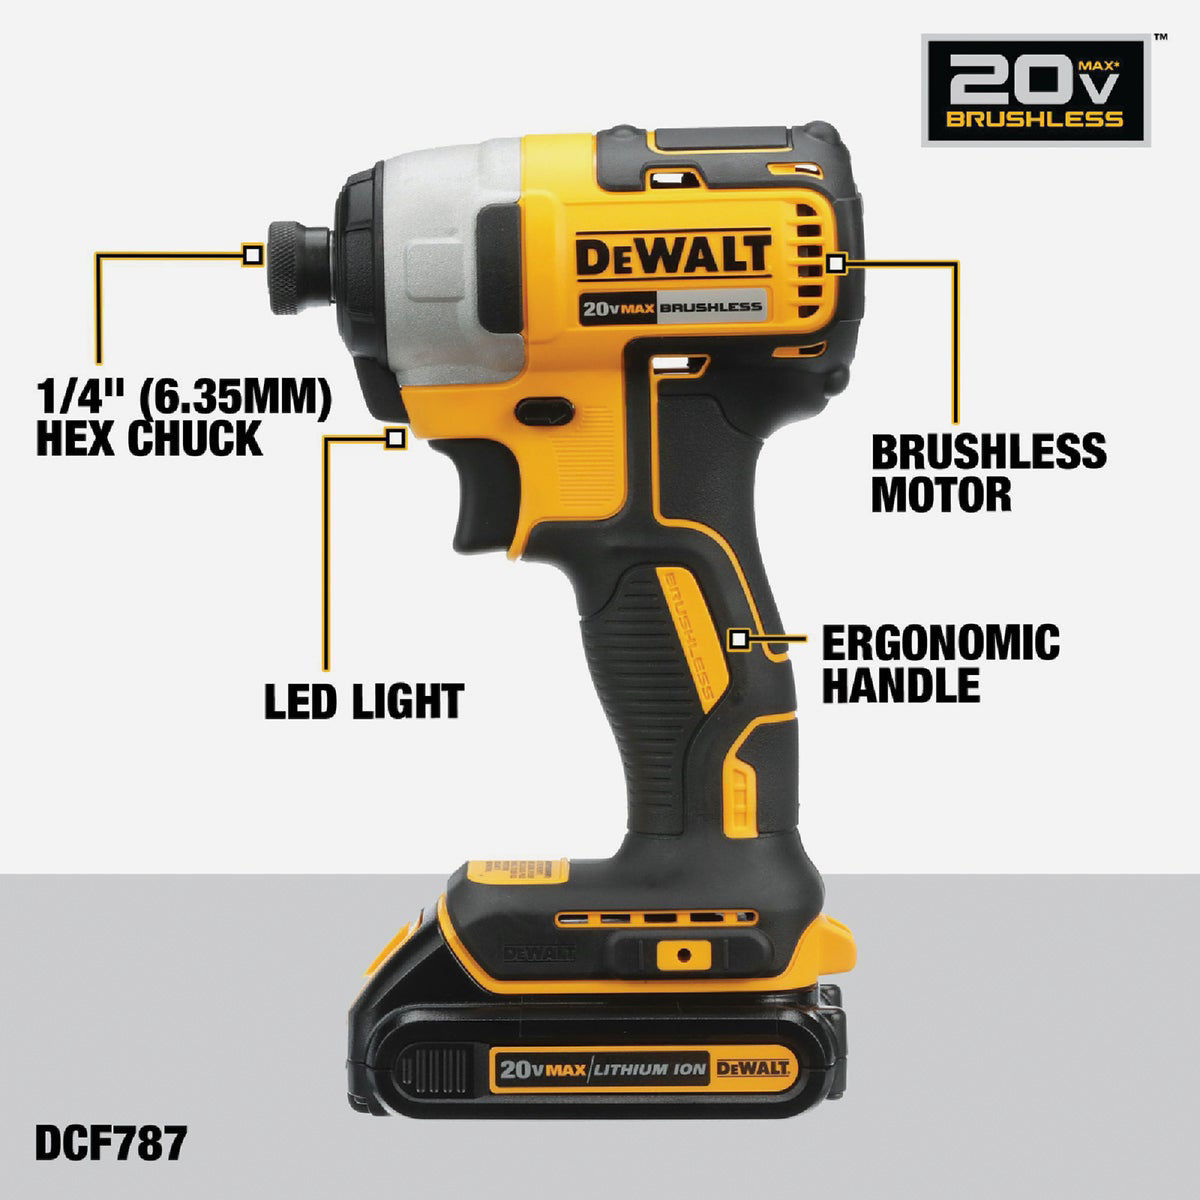 DEWALT 20V MAX Compact Brushless Drill/Driver And Impact Kit with 2  Batteries, Charger and Soft Bag in the Power Tool Combo Kits department at